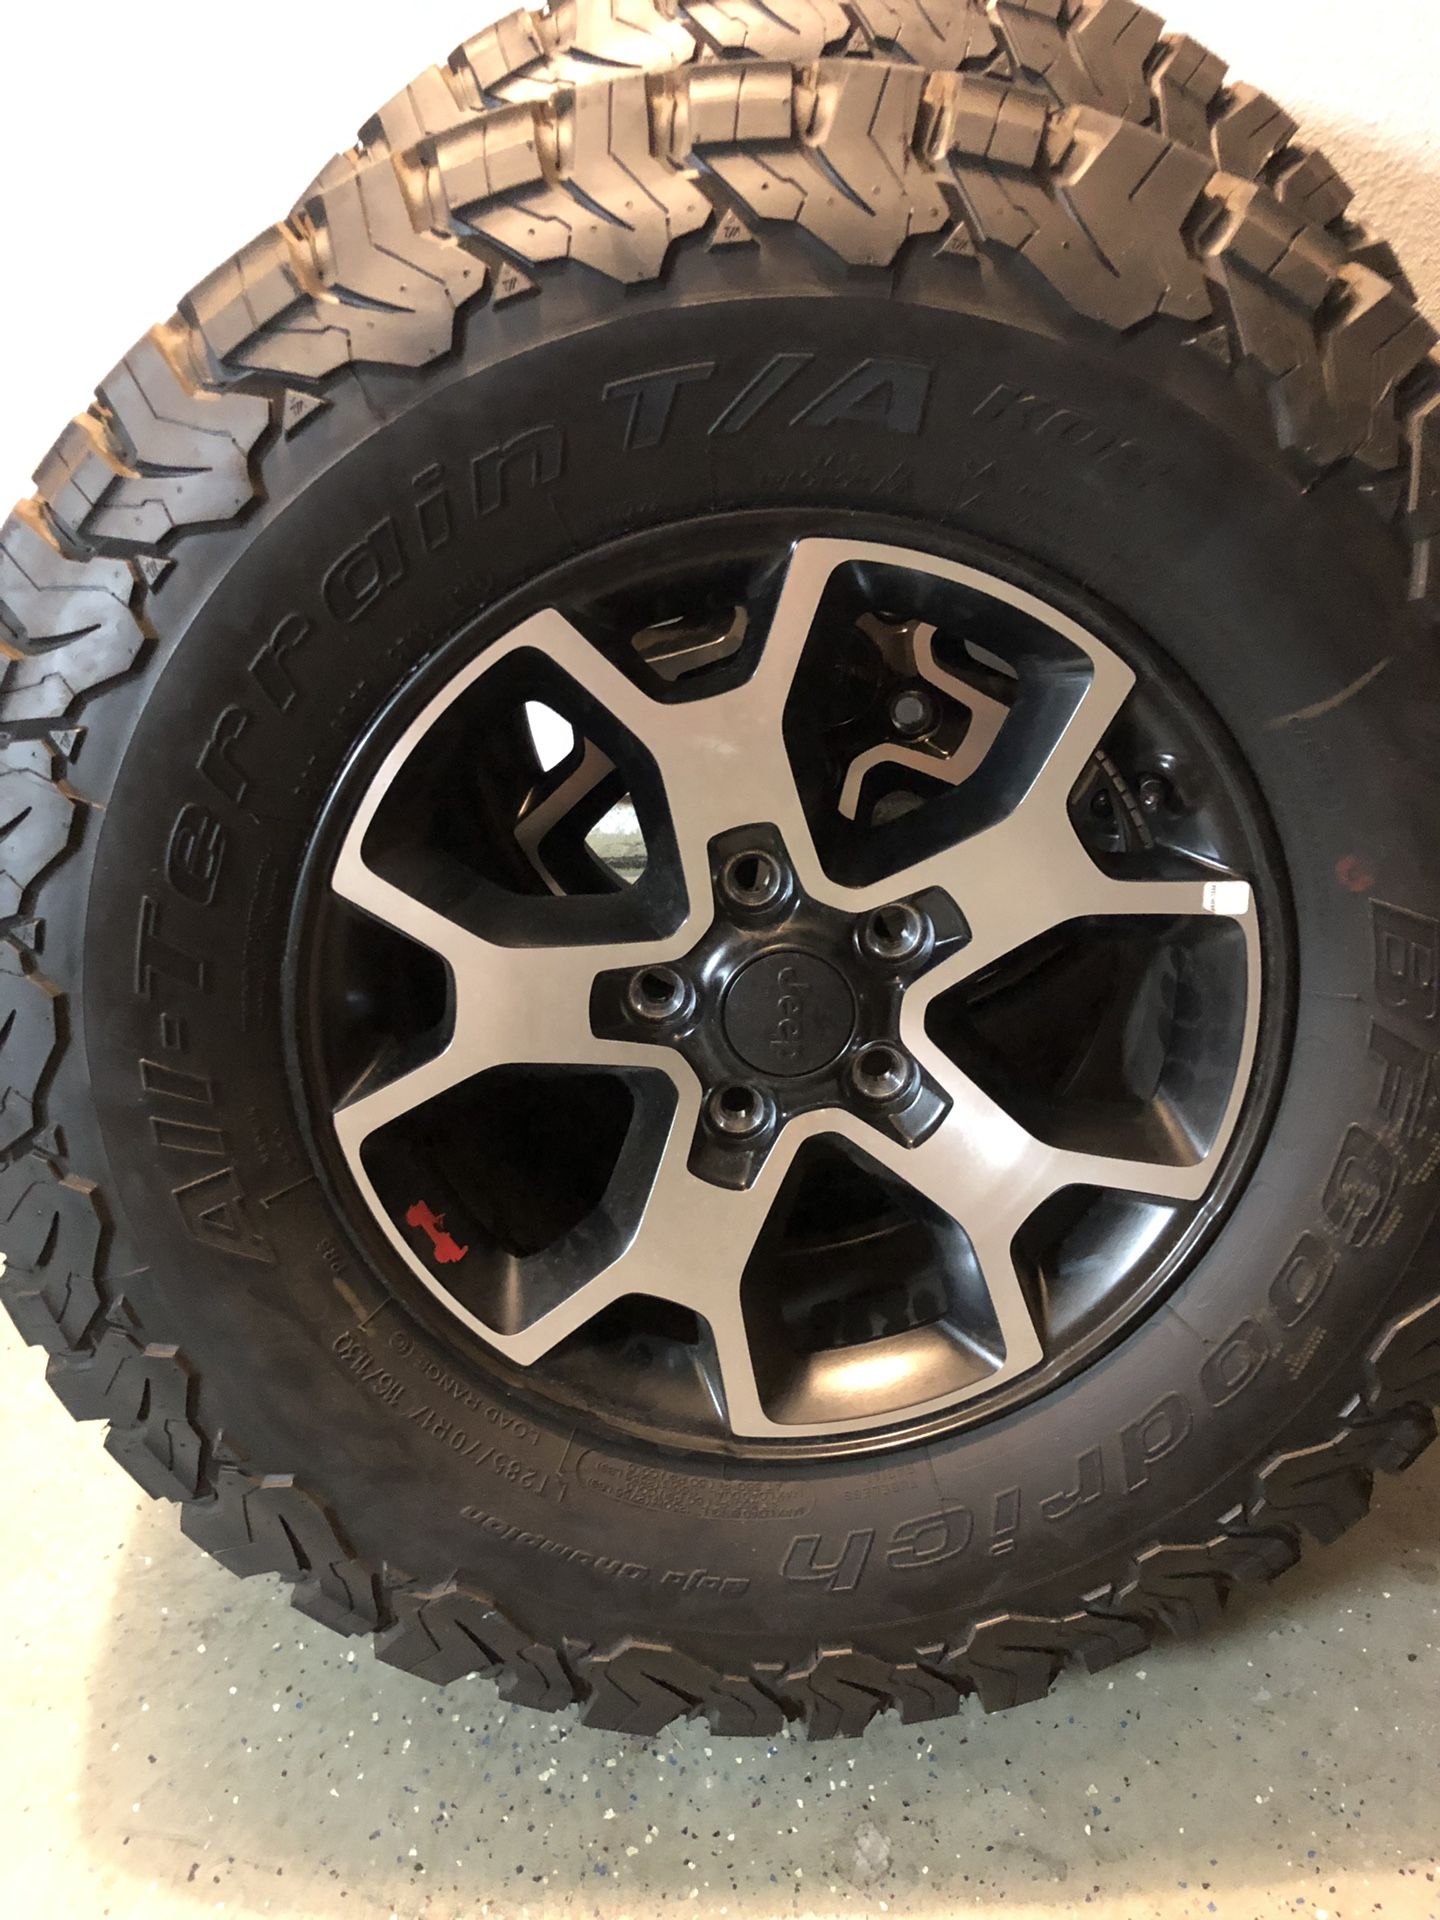 Jeep Rubicon wheels and tires